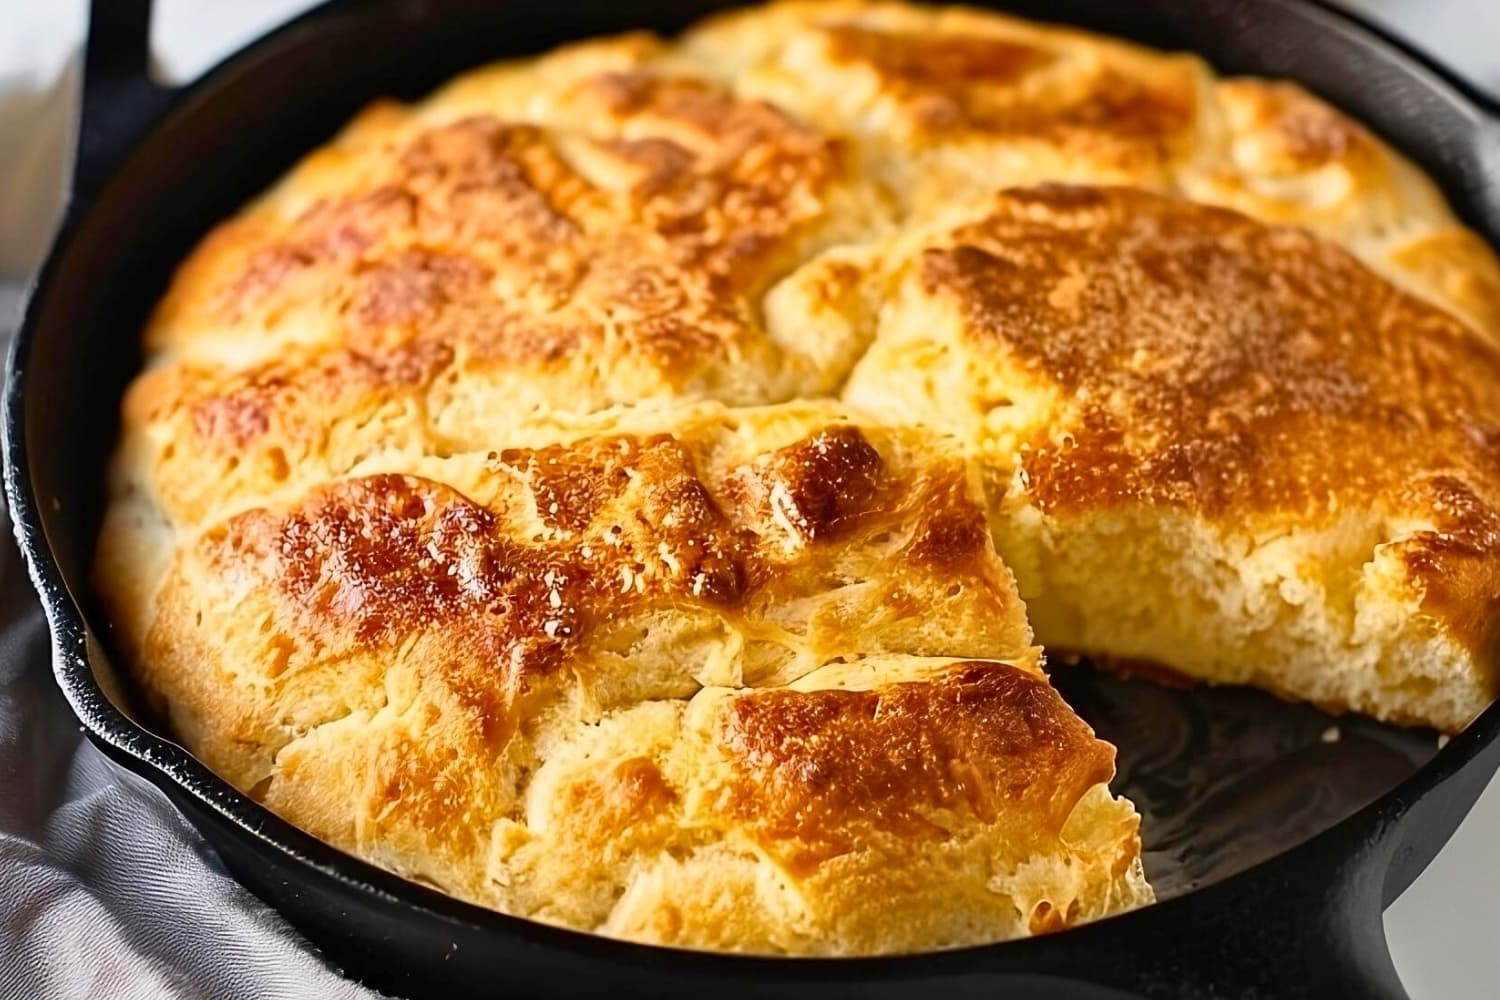 Biscuit bread in a cast iron skillet, portion missing.